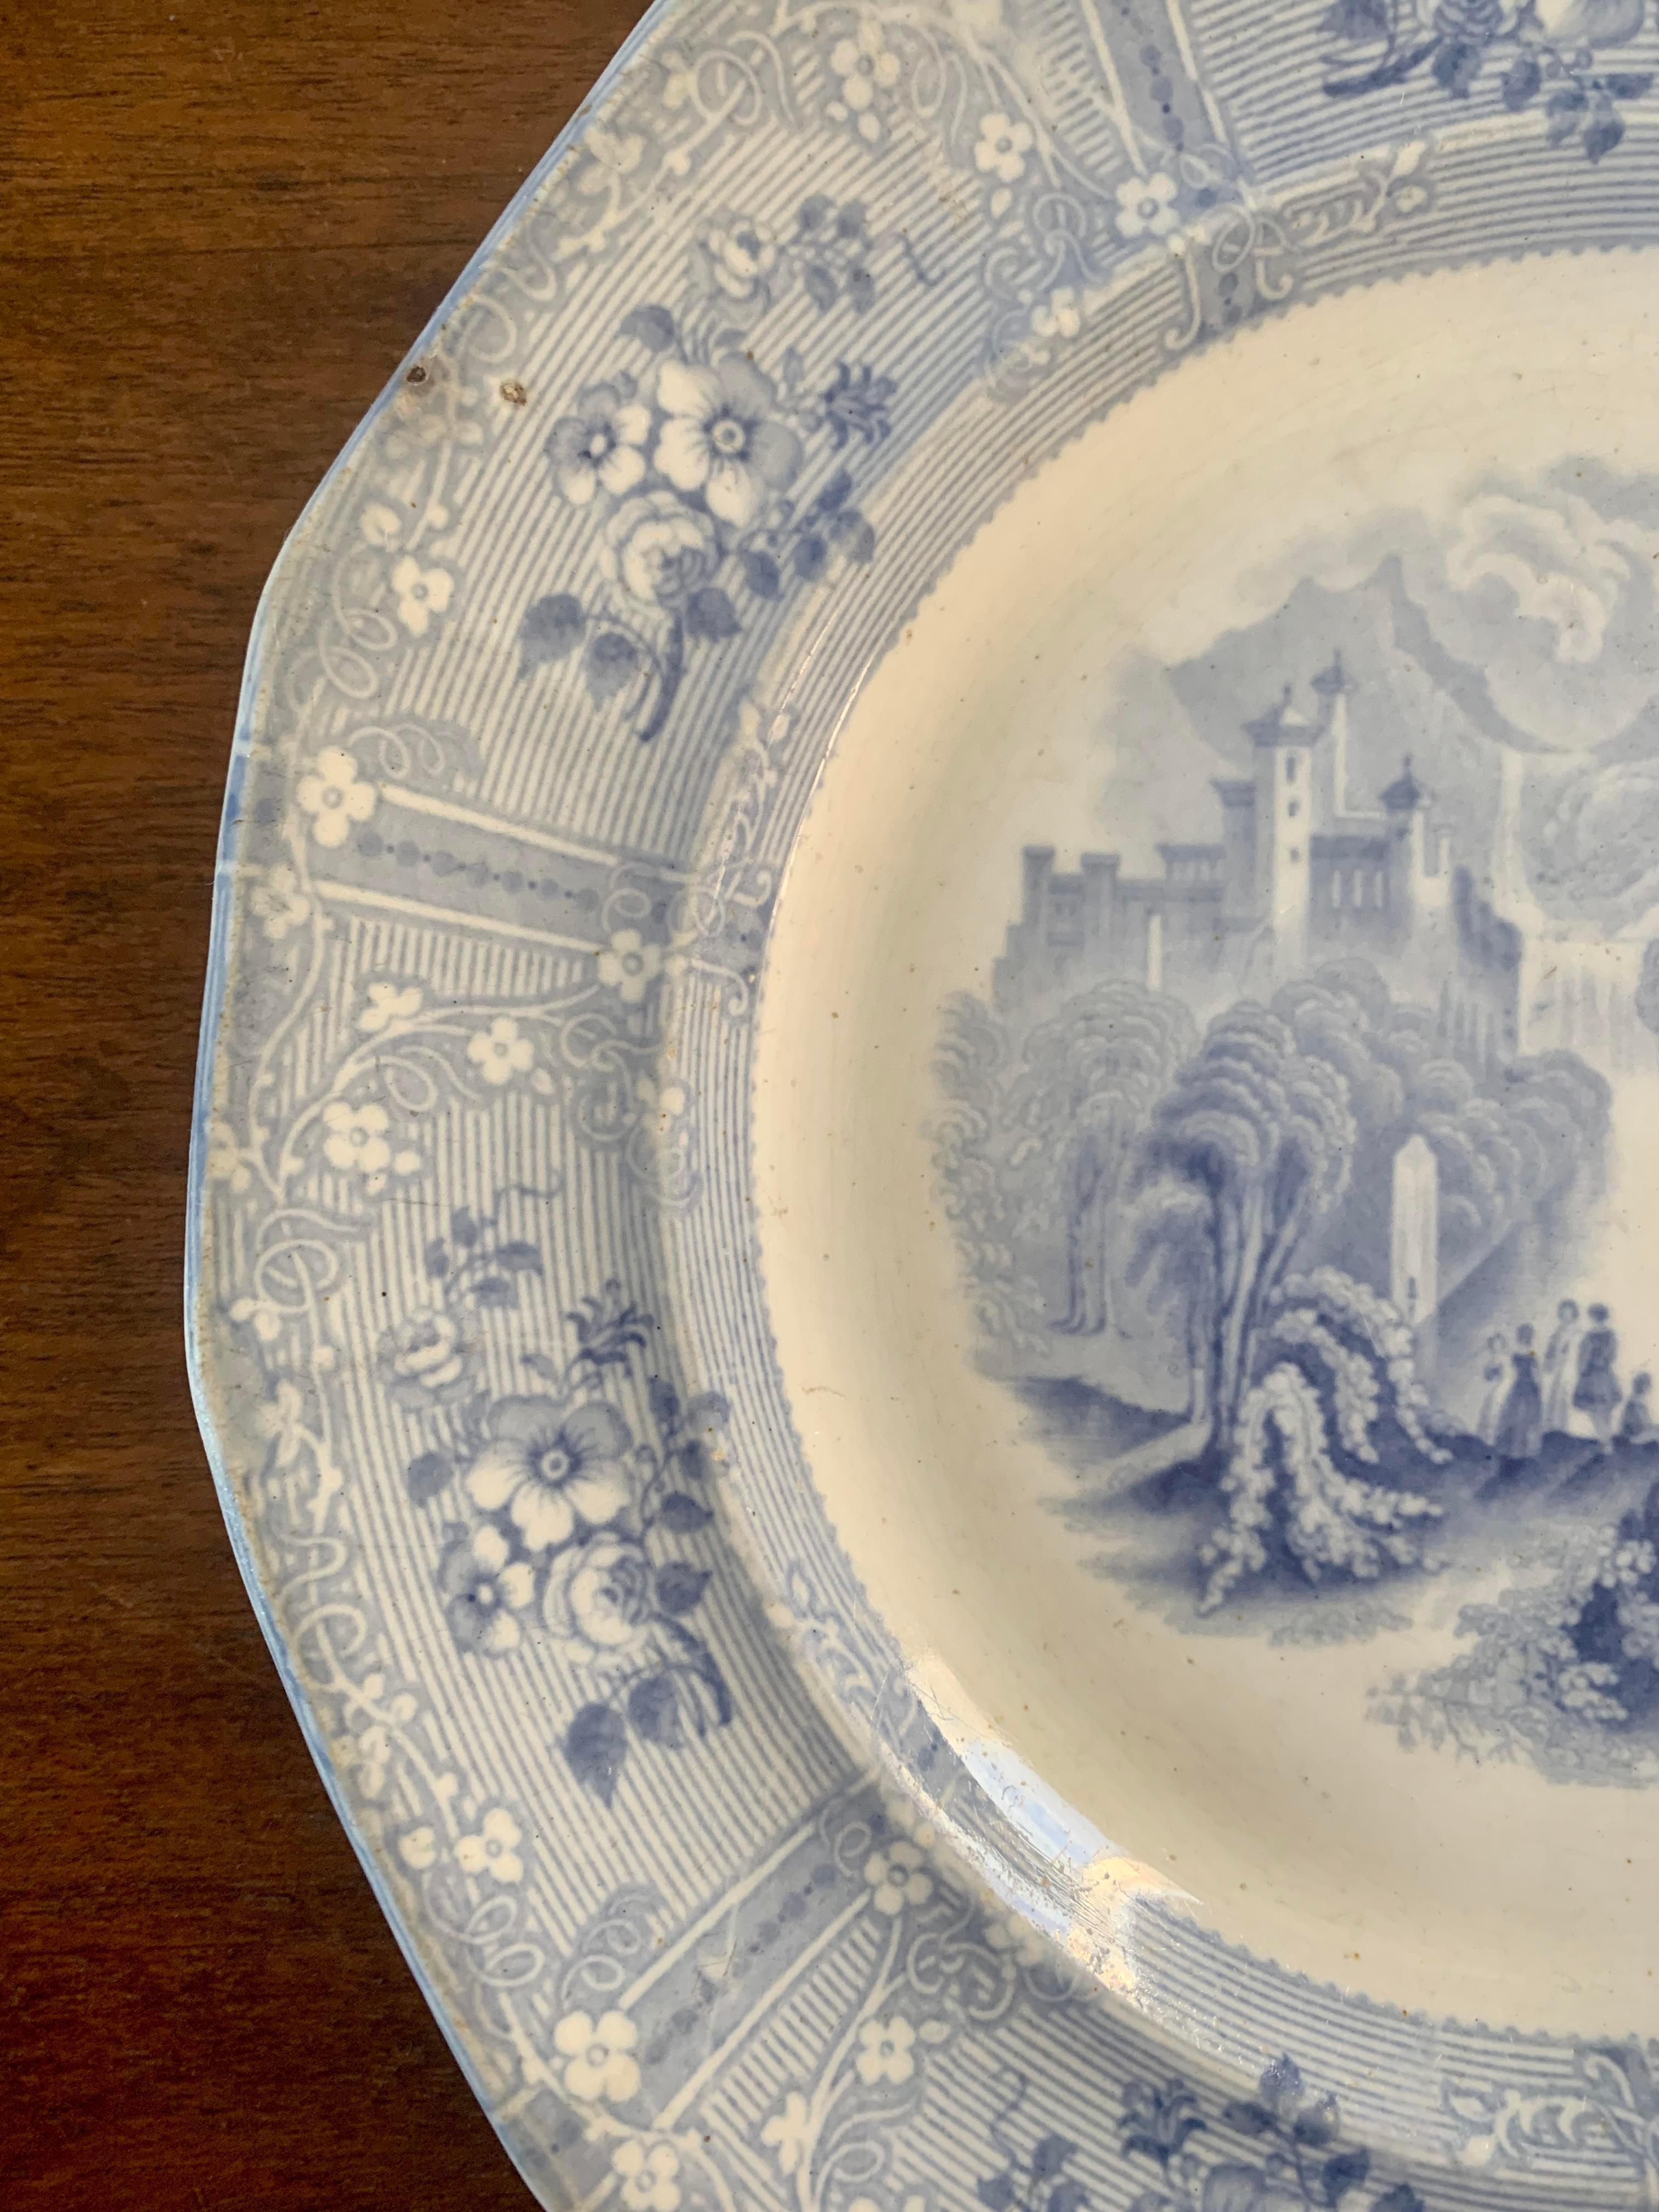 A gorgeous antique blue and white ironstone transfer ware plate.

England, Early 19th Century.

Measures: 9.25